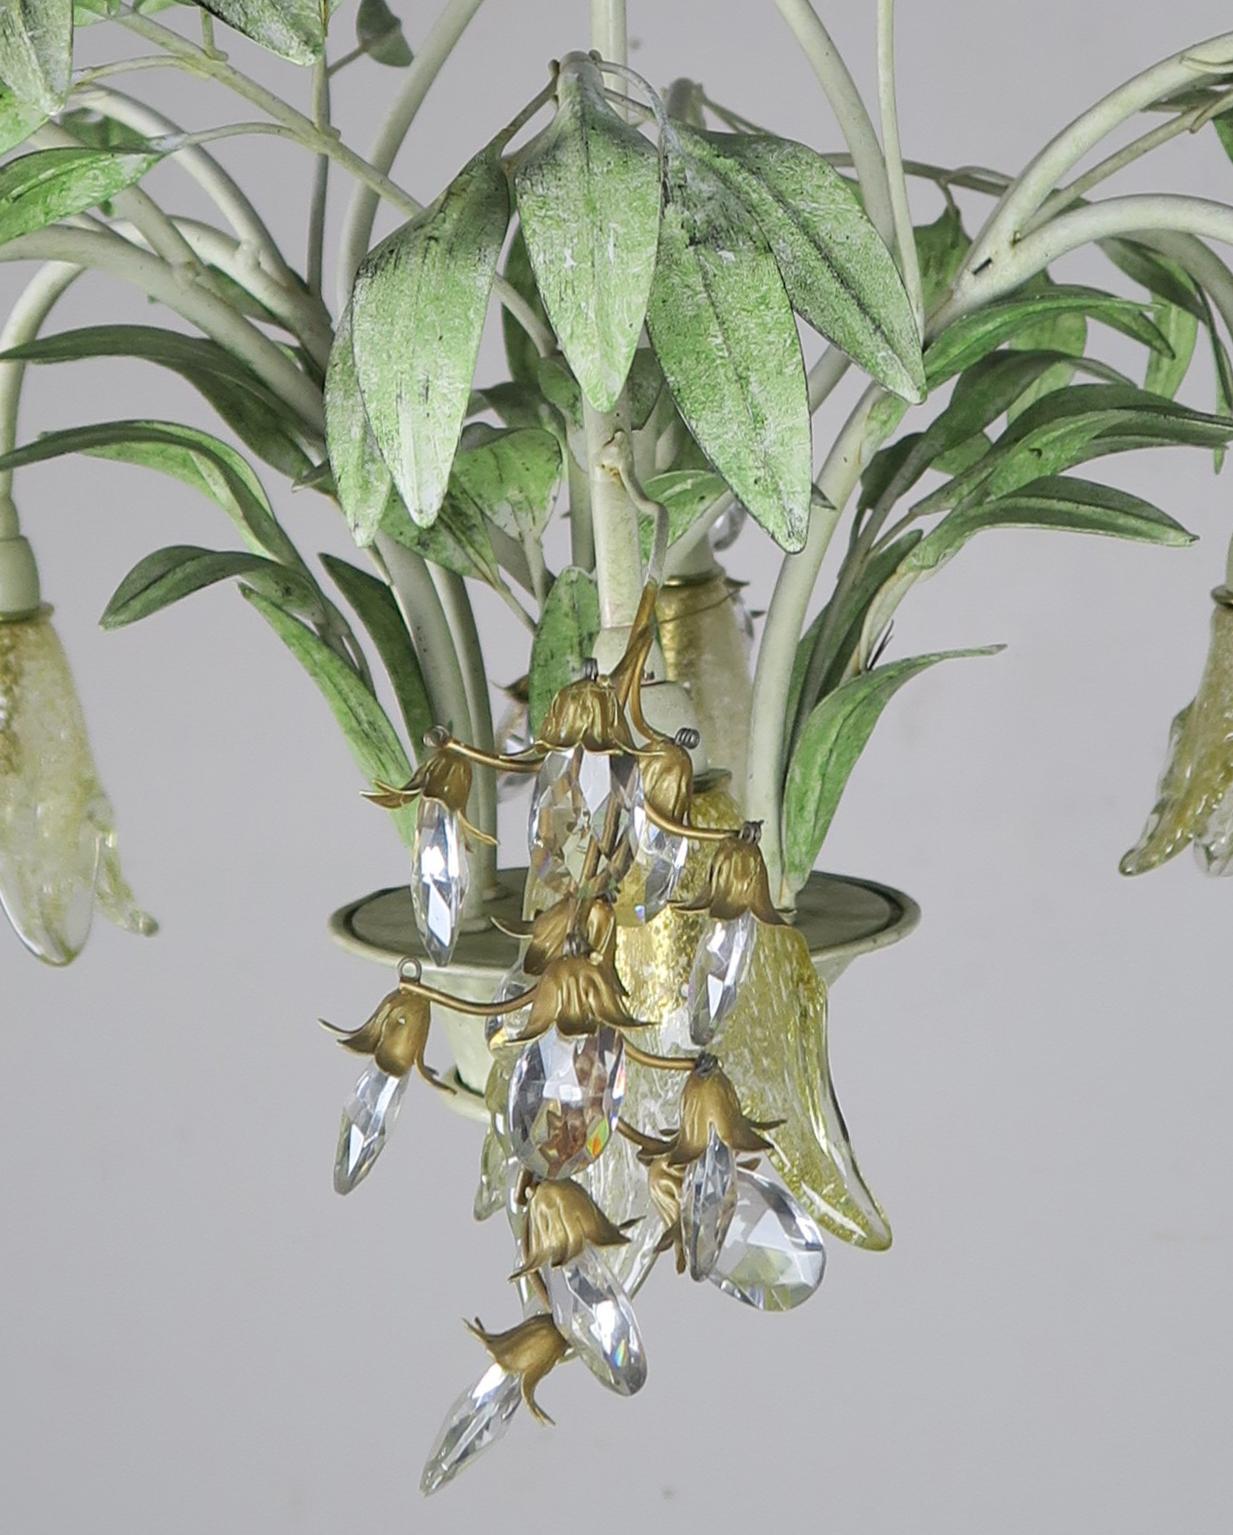 Hand-Painted Painted Tole and Murano Glass Chandelier, circa 1930s